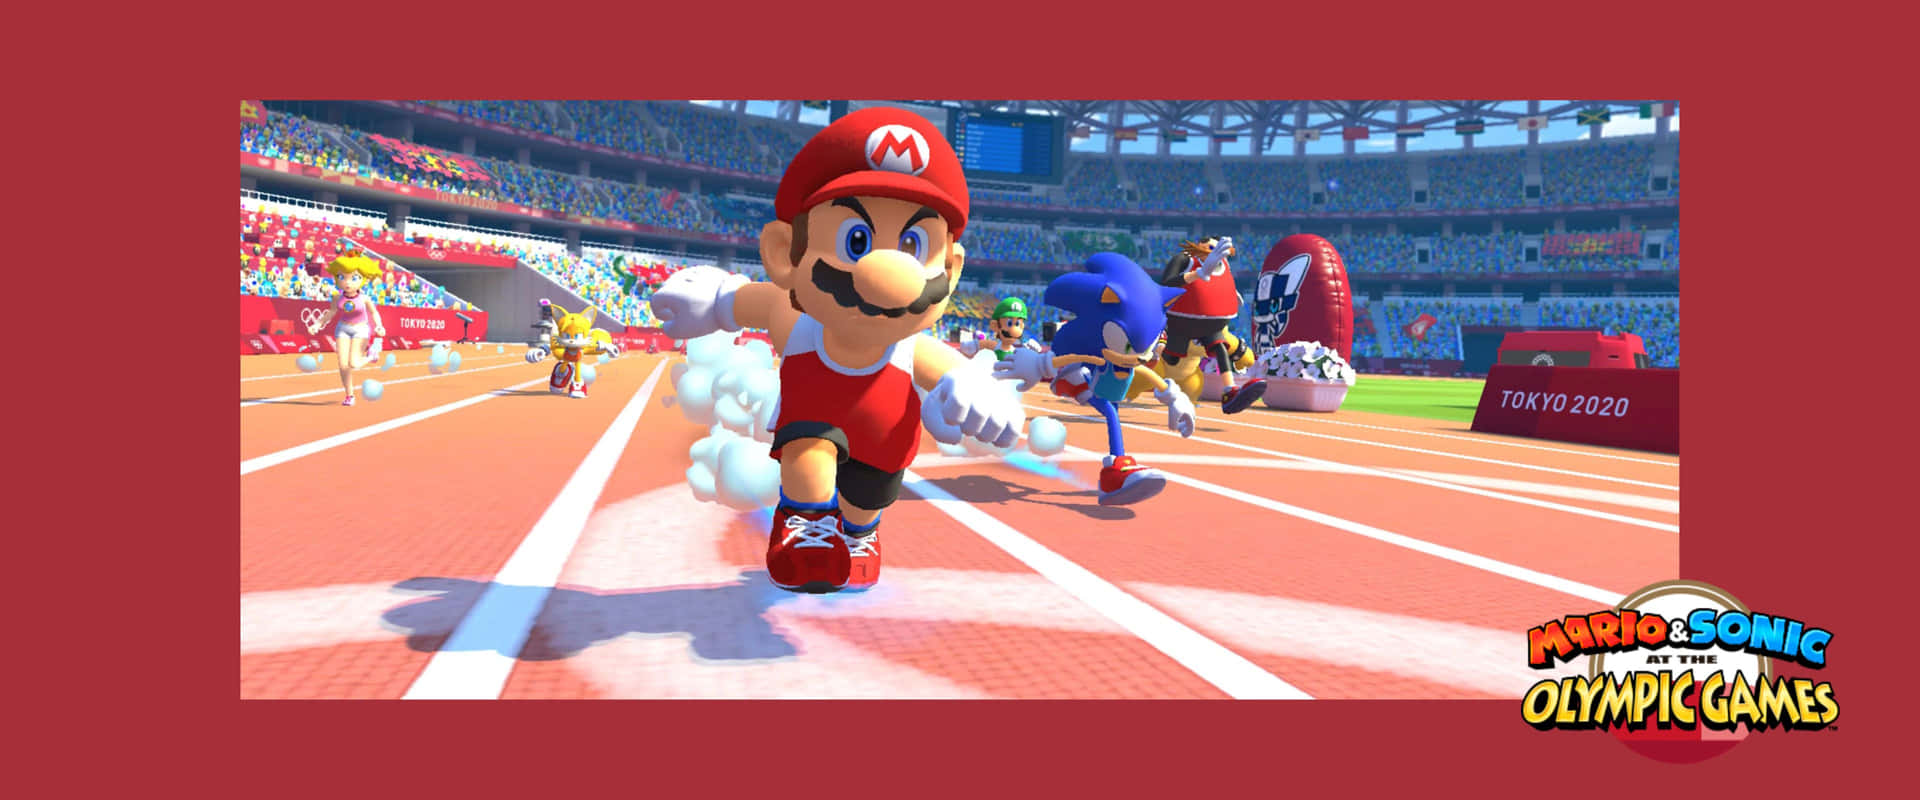 Mario And Sonic At The Olympic Games 3840 X 1600 Wallpaper Wallpaper